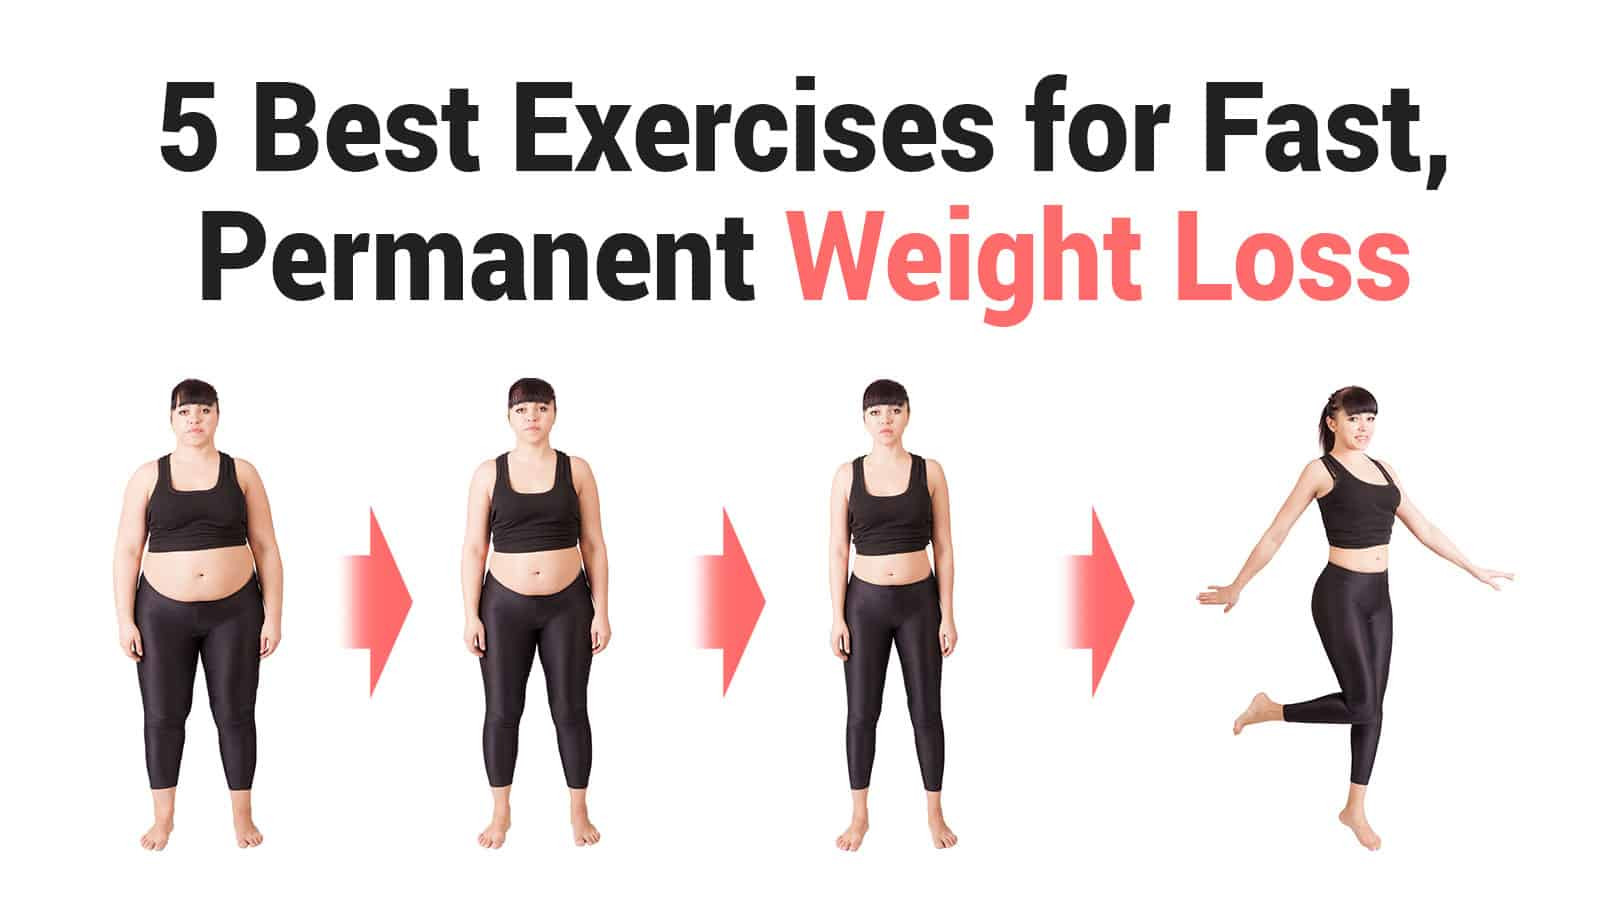 Quick Weight Loss Exercises
 5 Best Exercises for Fast Permanent Weight Loss